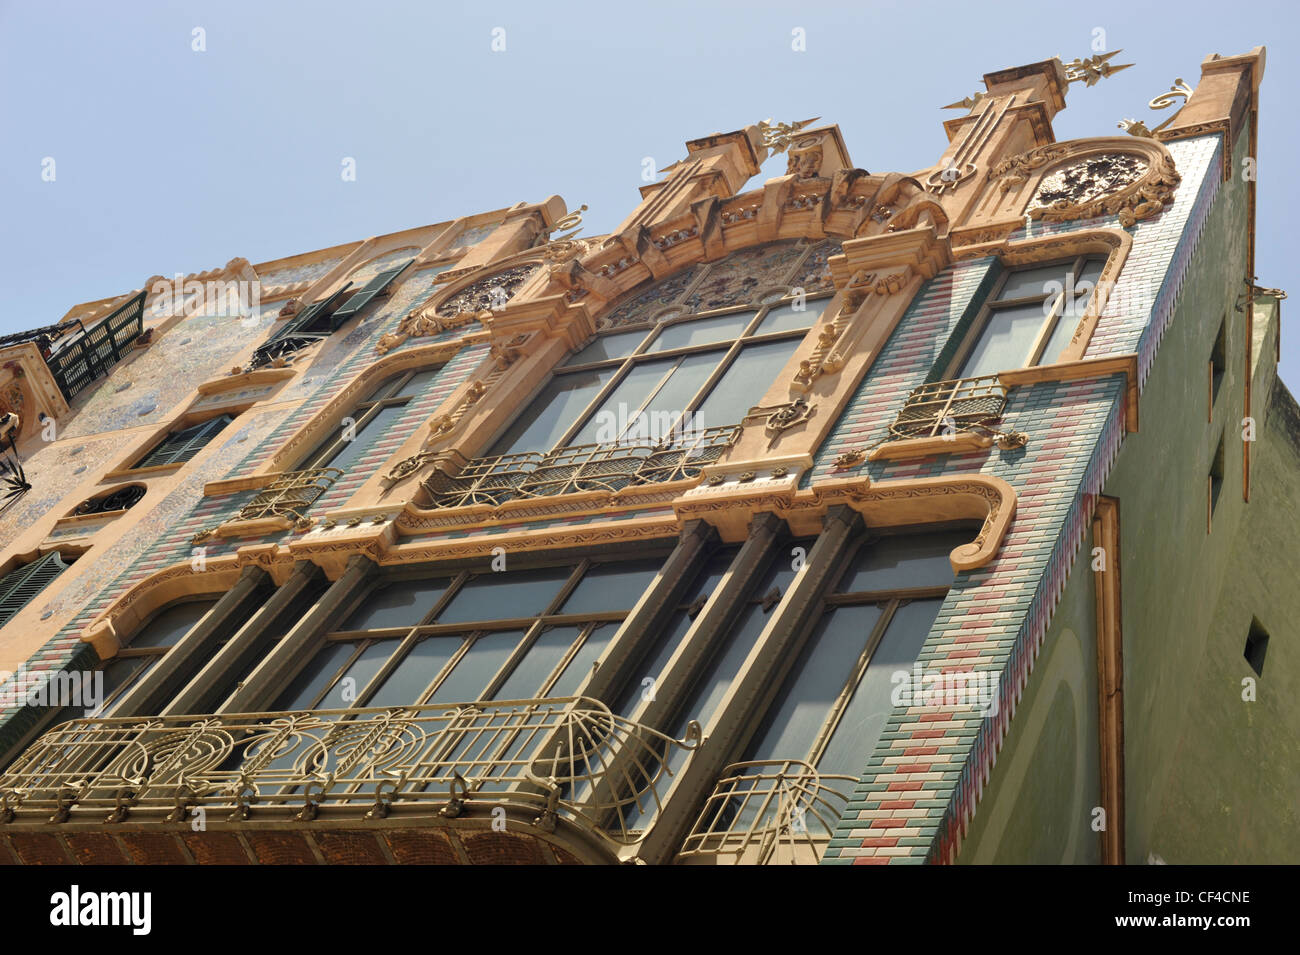 Art Nouveau buildings and balconies in the town of Palma Majorca Balieric Islands Spain Stock Photo